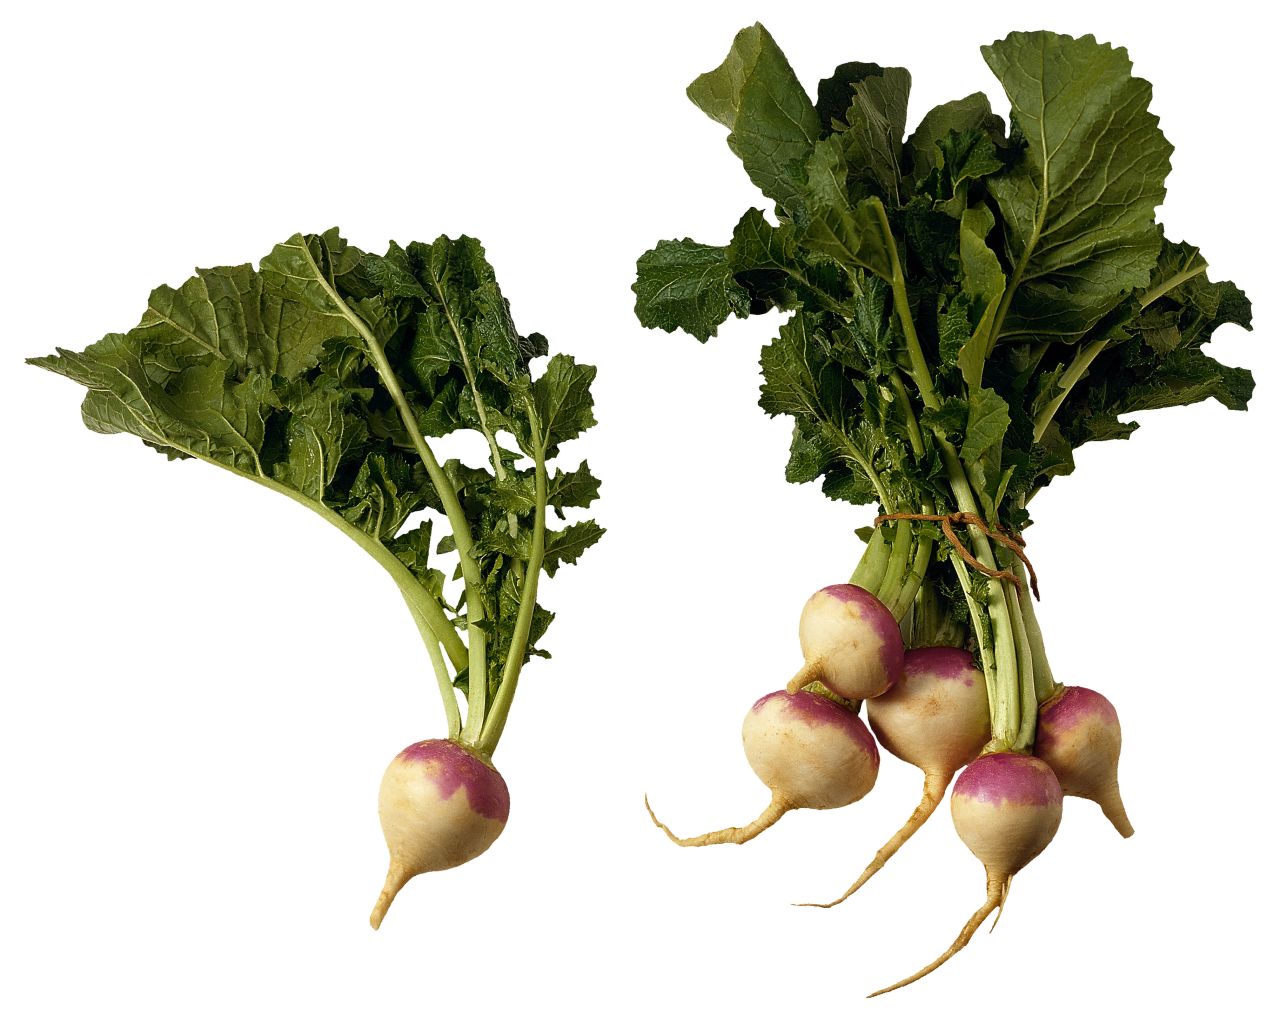 <strong>Turnips:</strong> Tender and mild, these root vegetables are a great alternative to radishes and cabbage. To flavor these veggies, use fennel, bread crumbs or even brown sugar. Turnip leaves, which taste like mustard leaves, are easy to cook and dense in nutrients. <br /><br />Health benefits include<br />• The roots are a good source of vitamin C <br />• Turnip leaves are an excellent source of vitamins A, K and folate <br /><br />Harvest season: September to April